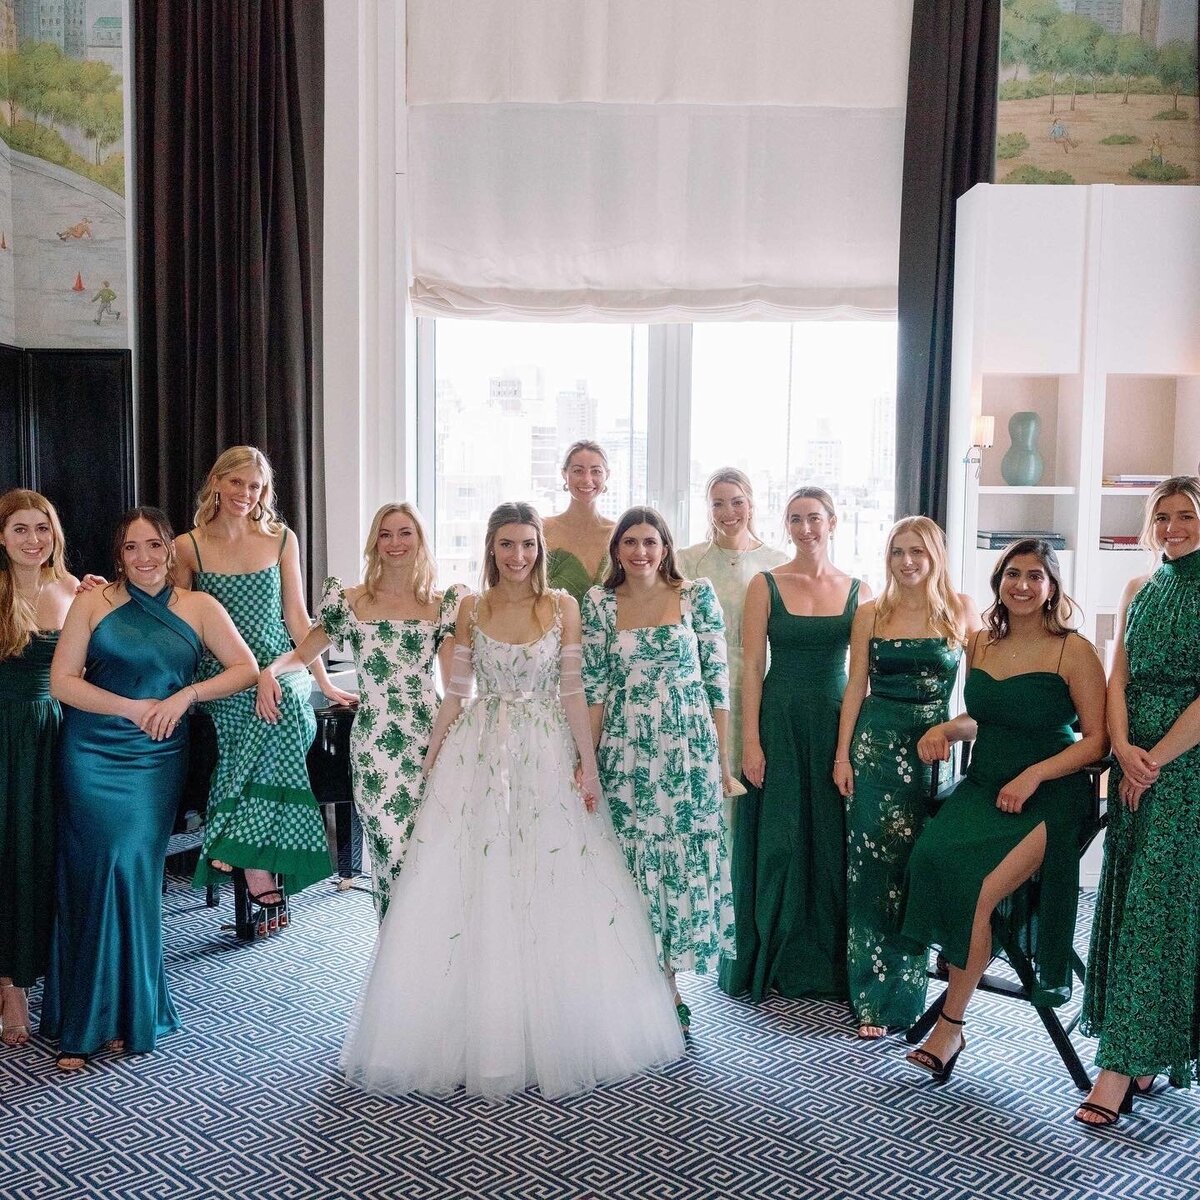 erica-renee-beauty-hair-and-makeup-duo-traveling-team-NYC-bride-green-bridesmaids-dresses-mismatched-modern-bridal-beauty-carlyle-hotel-NYC-over-the-moon-bride